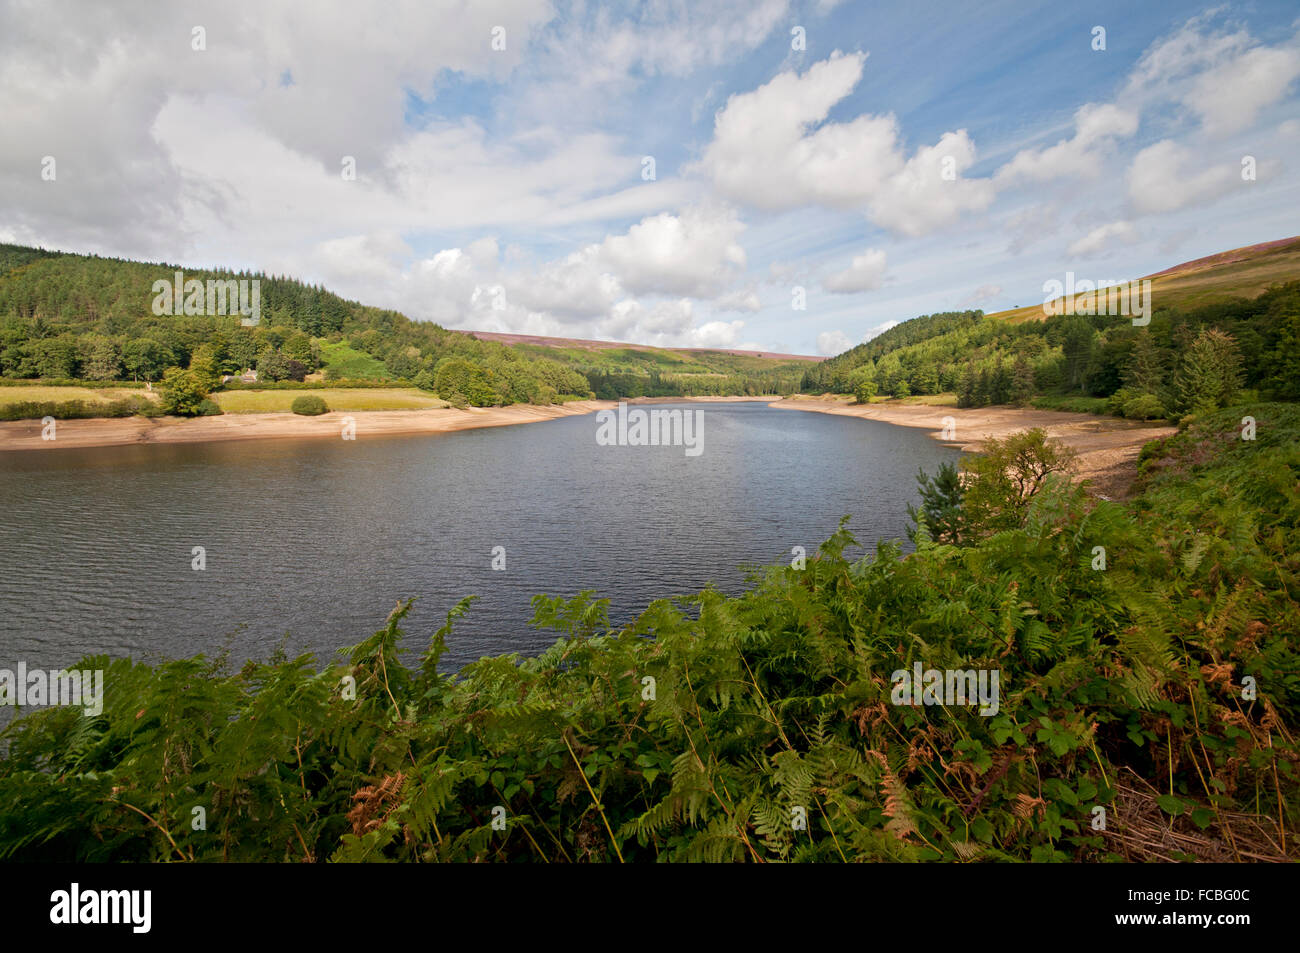 Derwent Reservoir in the Peak District. Famous for its role in the second world war with the Dambuster raids. Stock Photo